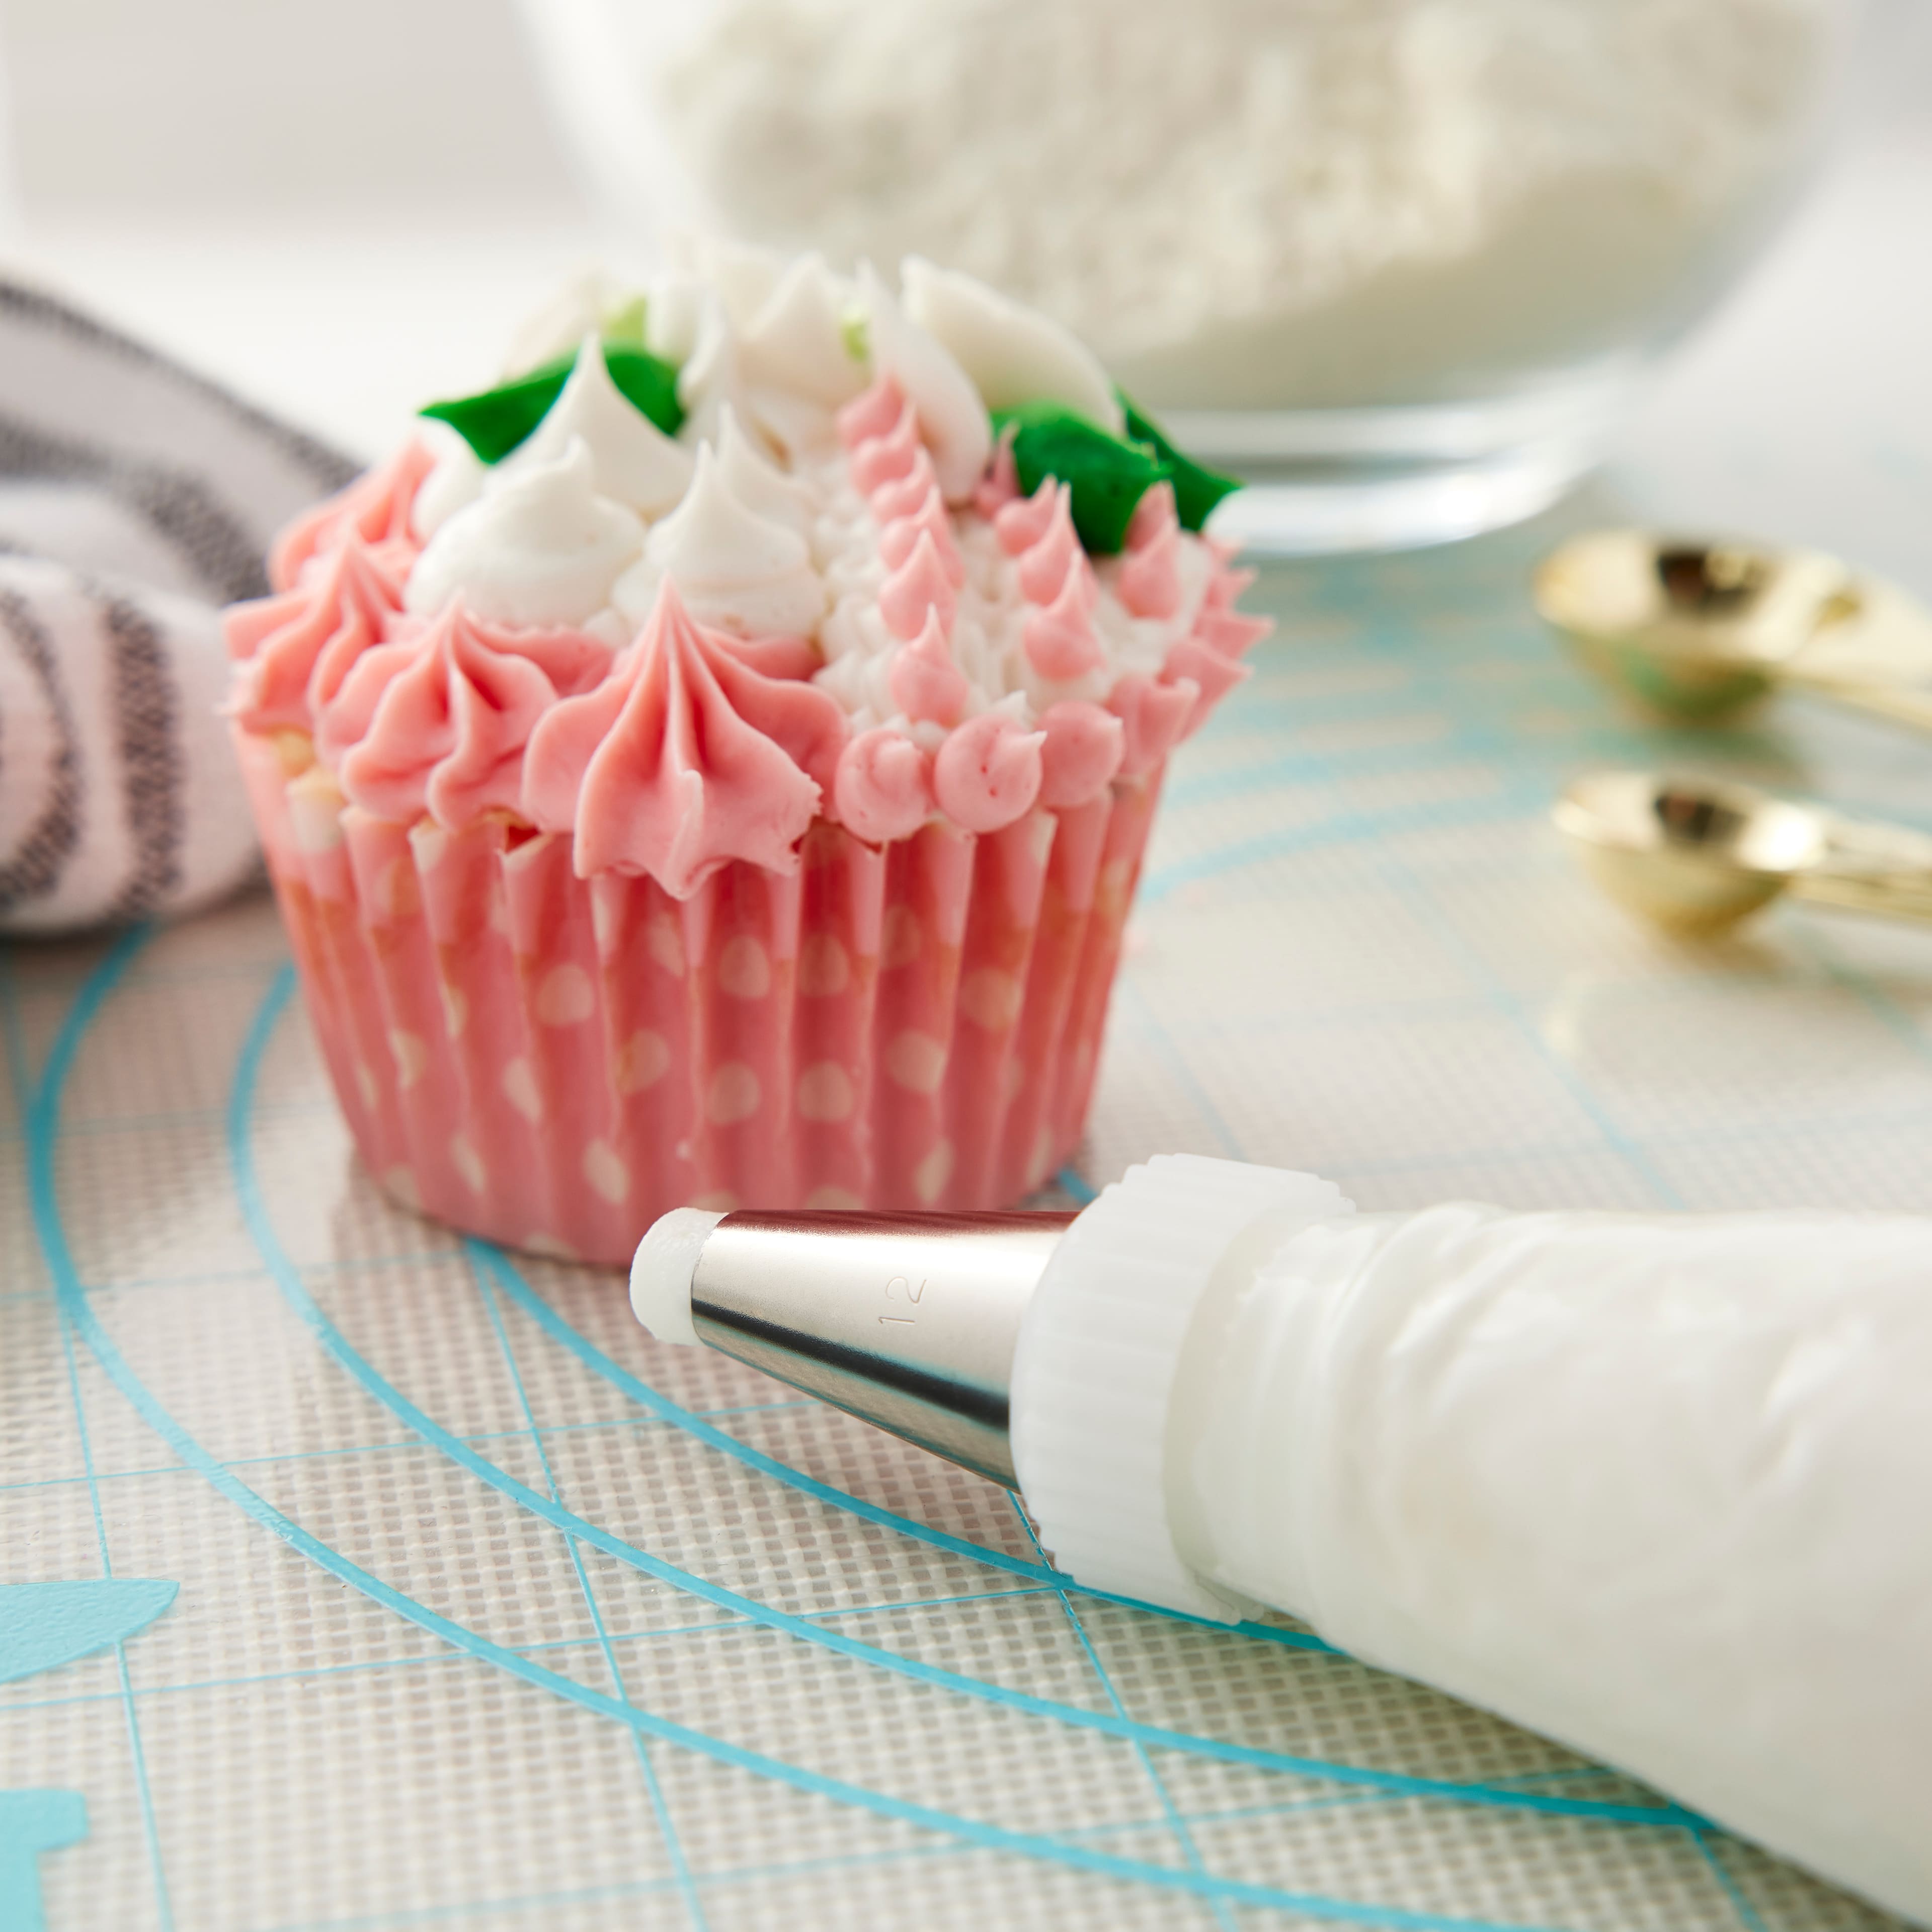 Discover more than 58 piping bags and tips michaels best - in.duhocakina